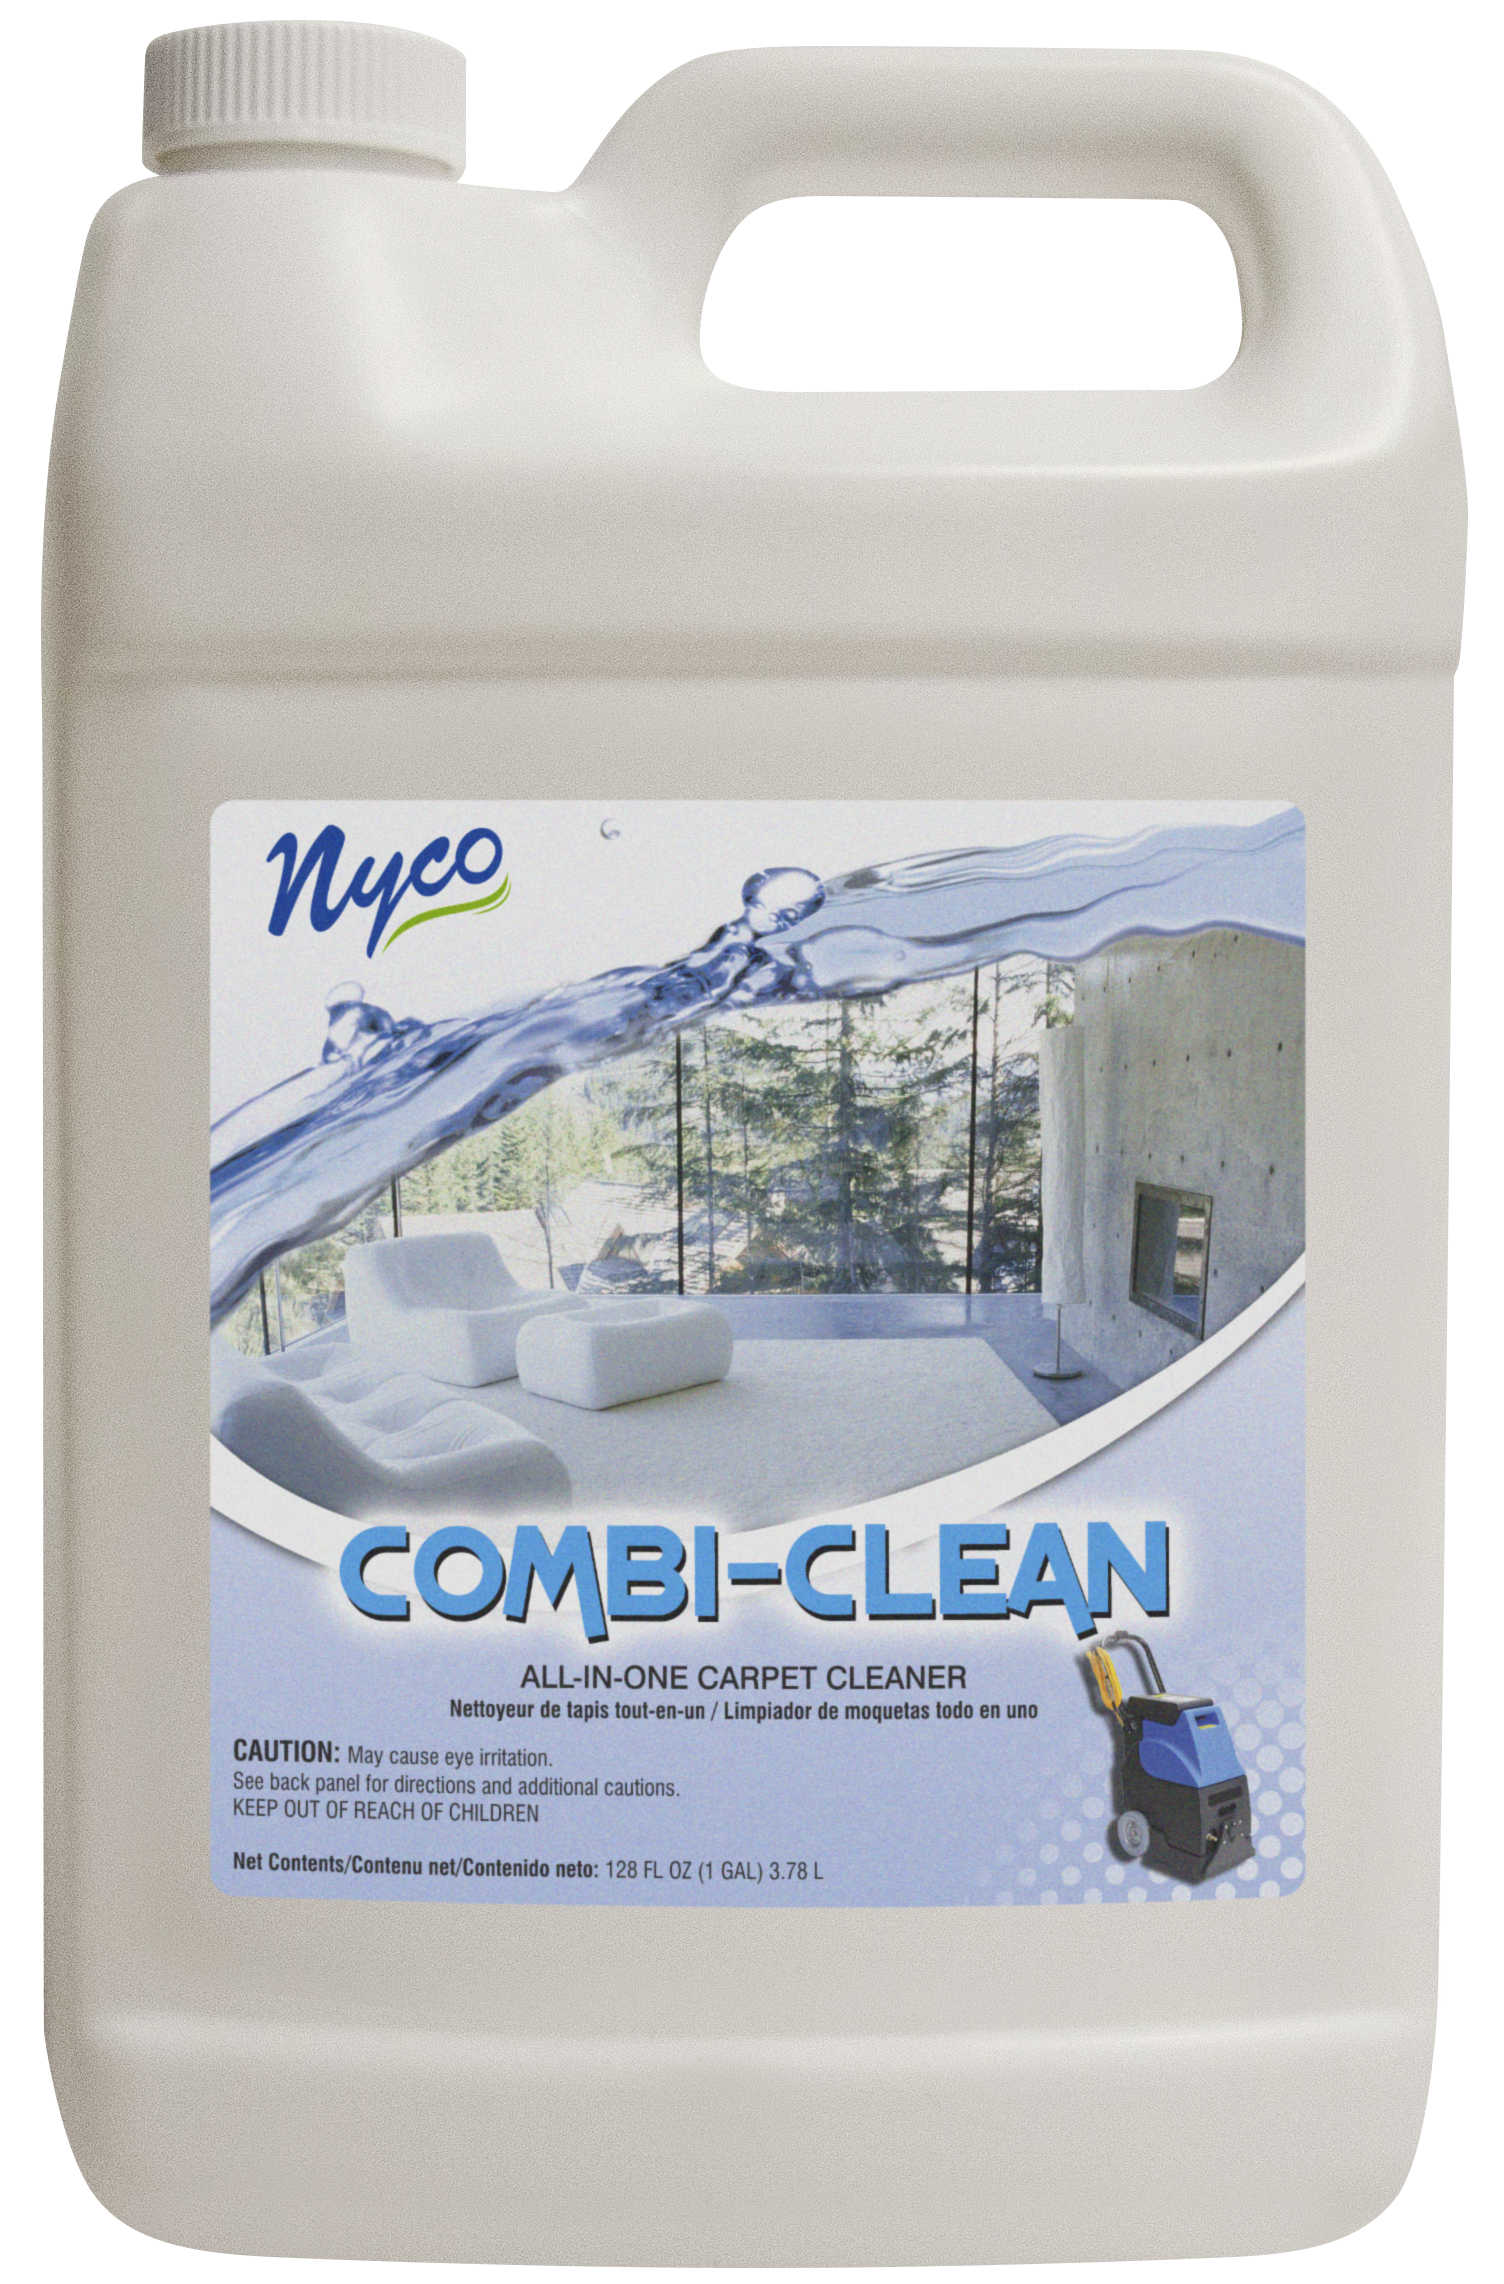 Stainless Steel Cleaner & Polish - Nyco Products Company